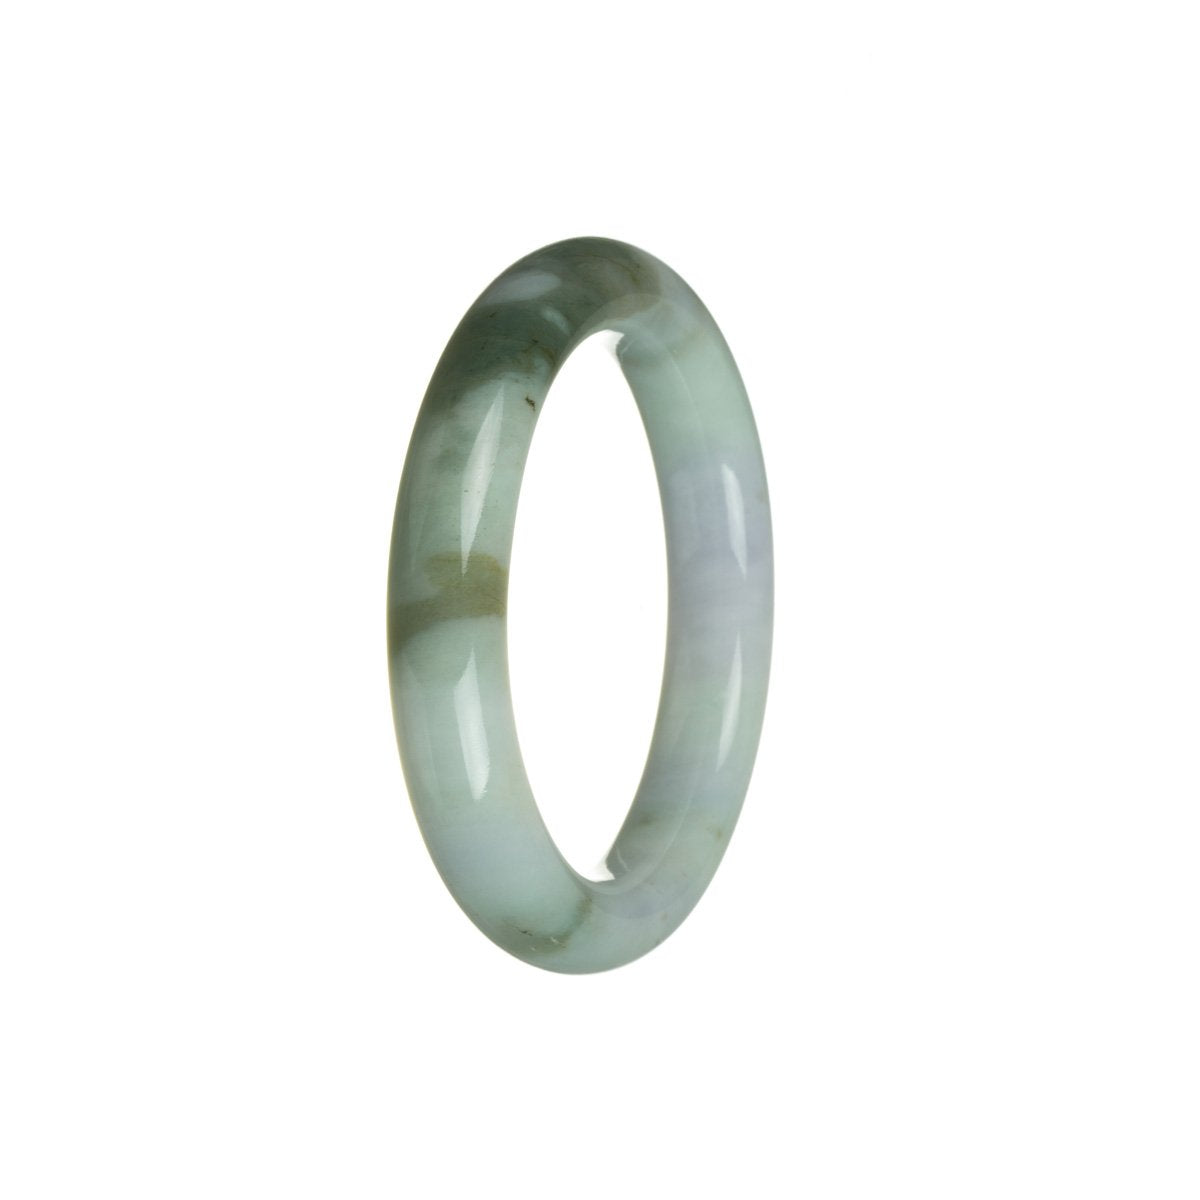 A beautiful jade bangle bracelet with natural green, lavender, and white colors, featuring a semi-round shape. Perfect for adding elegance to any outfit.